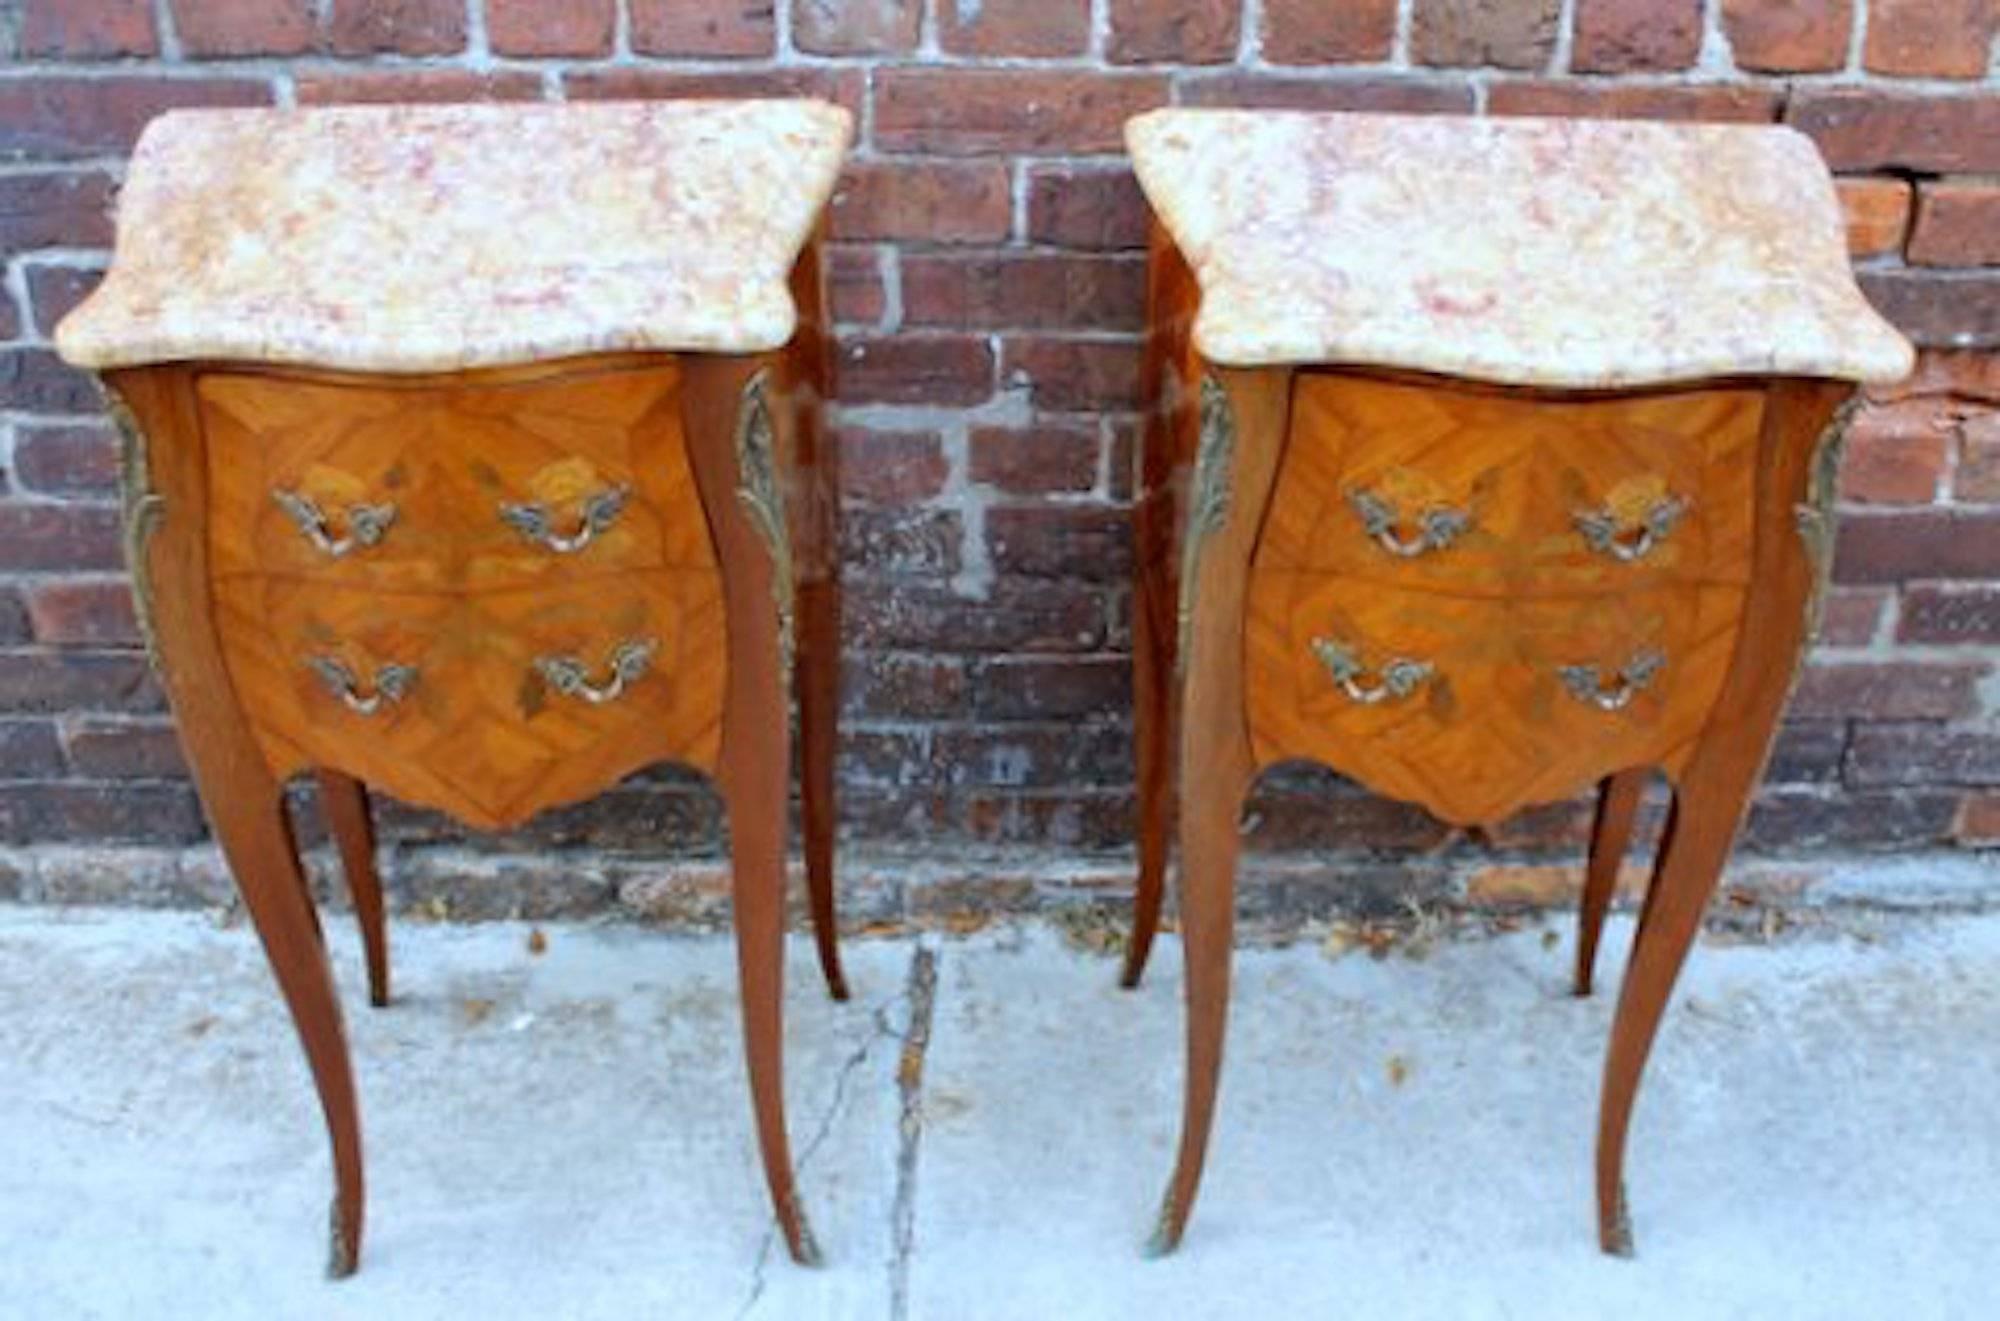 Pair of fabulous quality old French Louis XV style marquetry inlaid and ormolu-mounted two-drawer kingwood marble top chairside or bedside tables

Please note fabulous inlay in exotic woods and original, pristine marble tops. 

Measures: 15 1/2